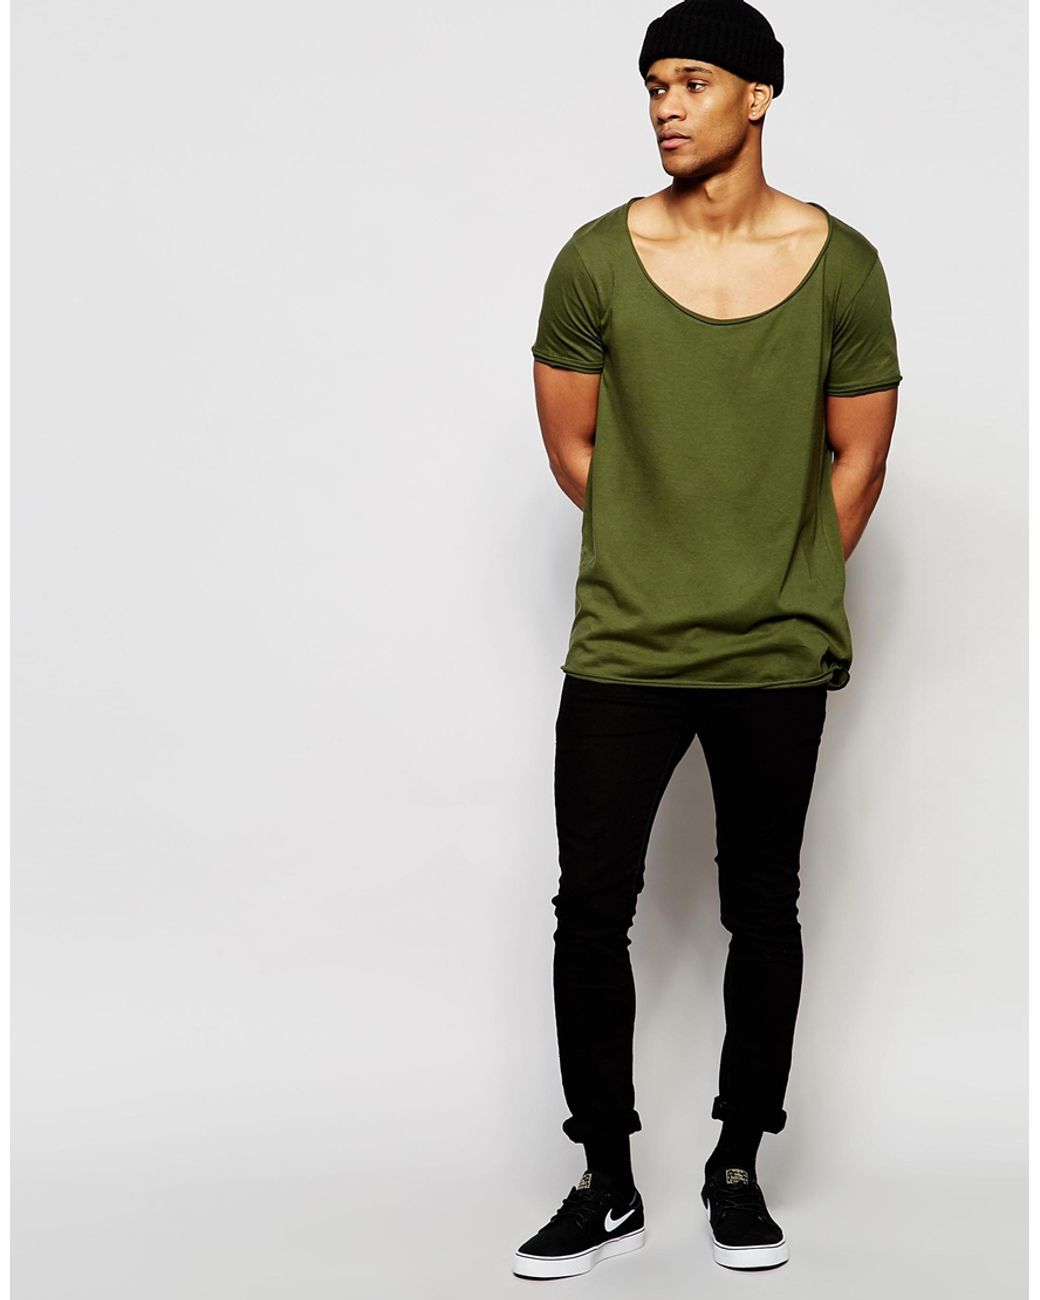 https://cdna.lystit.com/1040/1300/n/photos/7243-2016/03/20/asos-wintermoss-longline-t-shirt-with-wide-scoop-neck-and-raw-edge-in-green-product-1-698844220-normal.jpeg